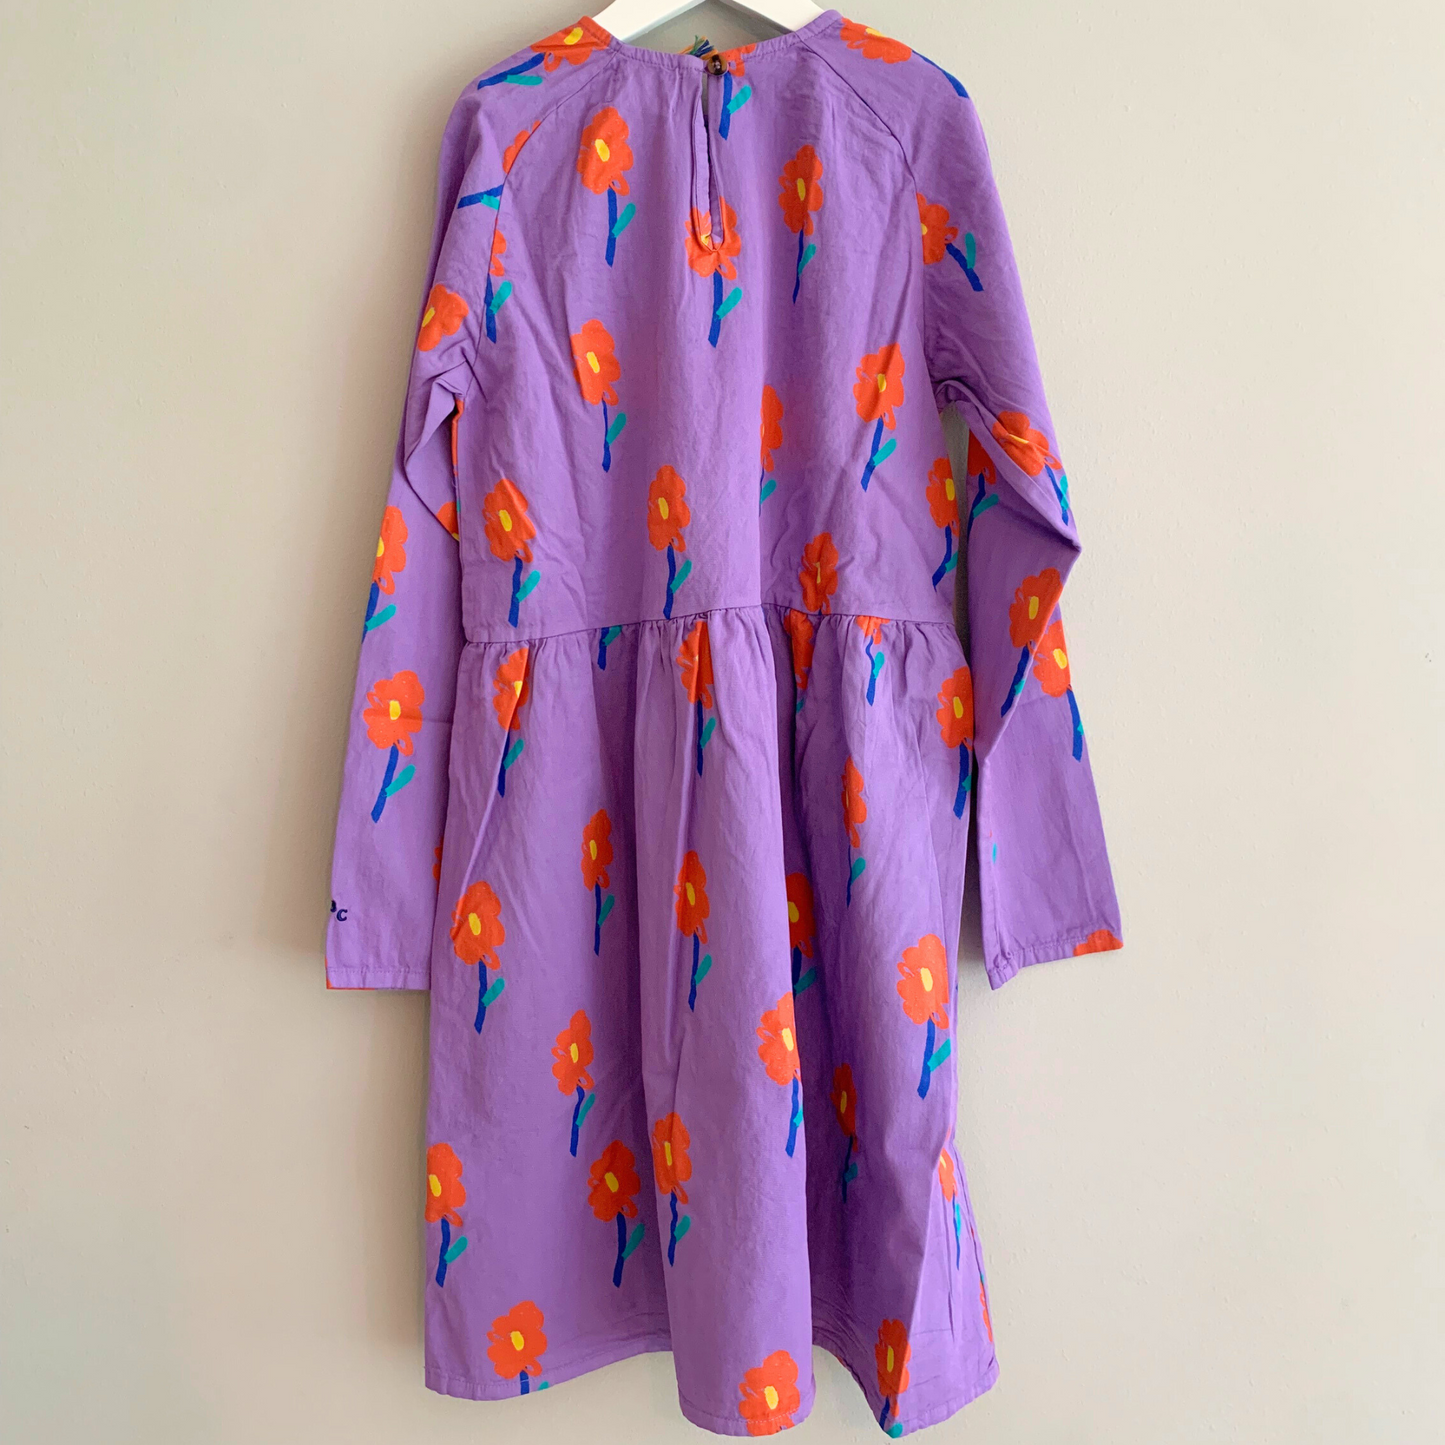 Flower Print Woven Dress (New with Tags) - Size 10Y